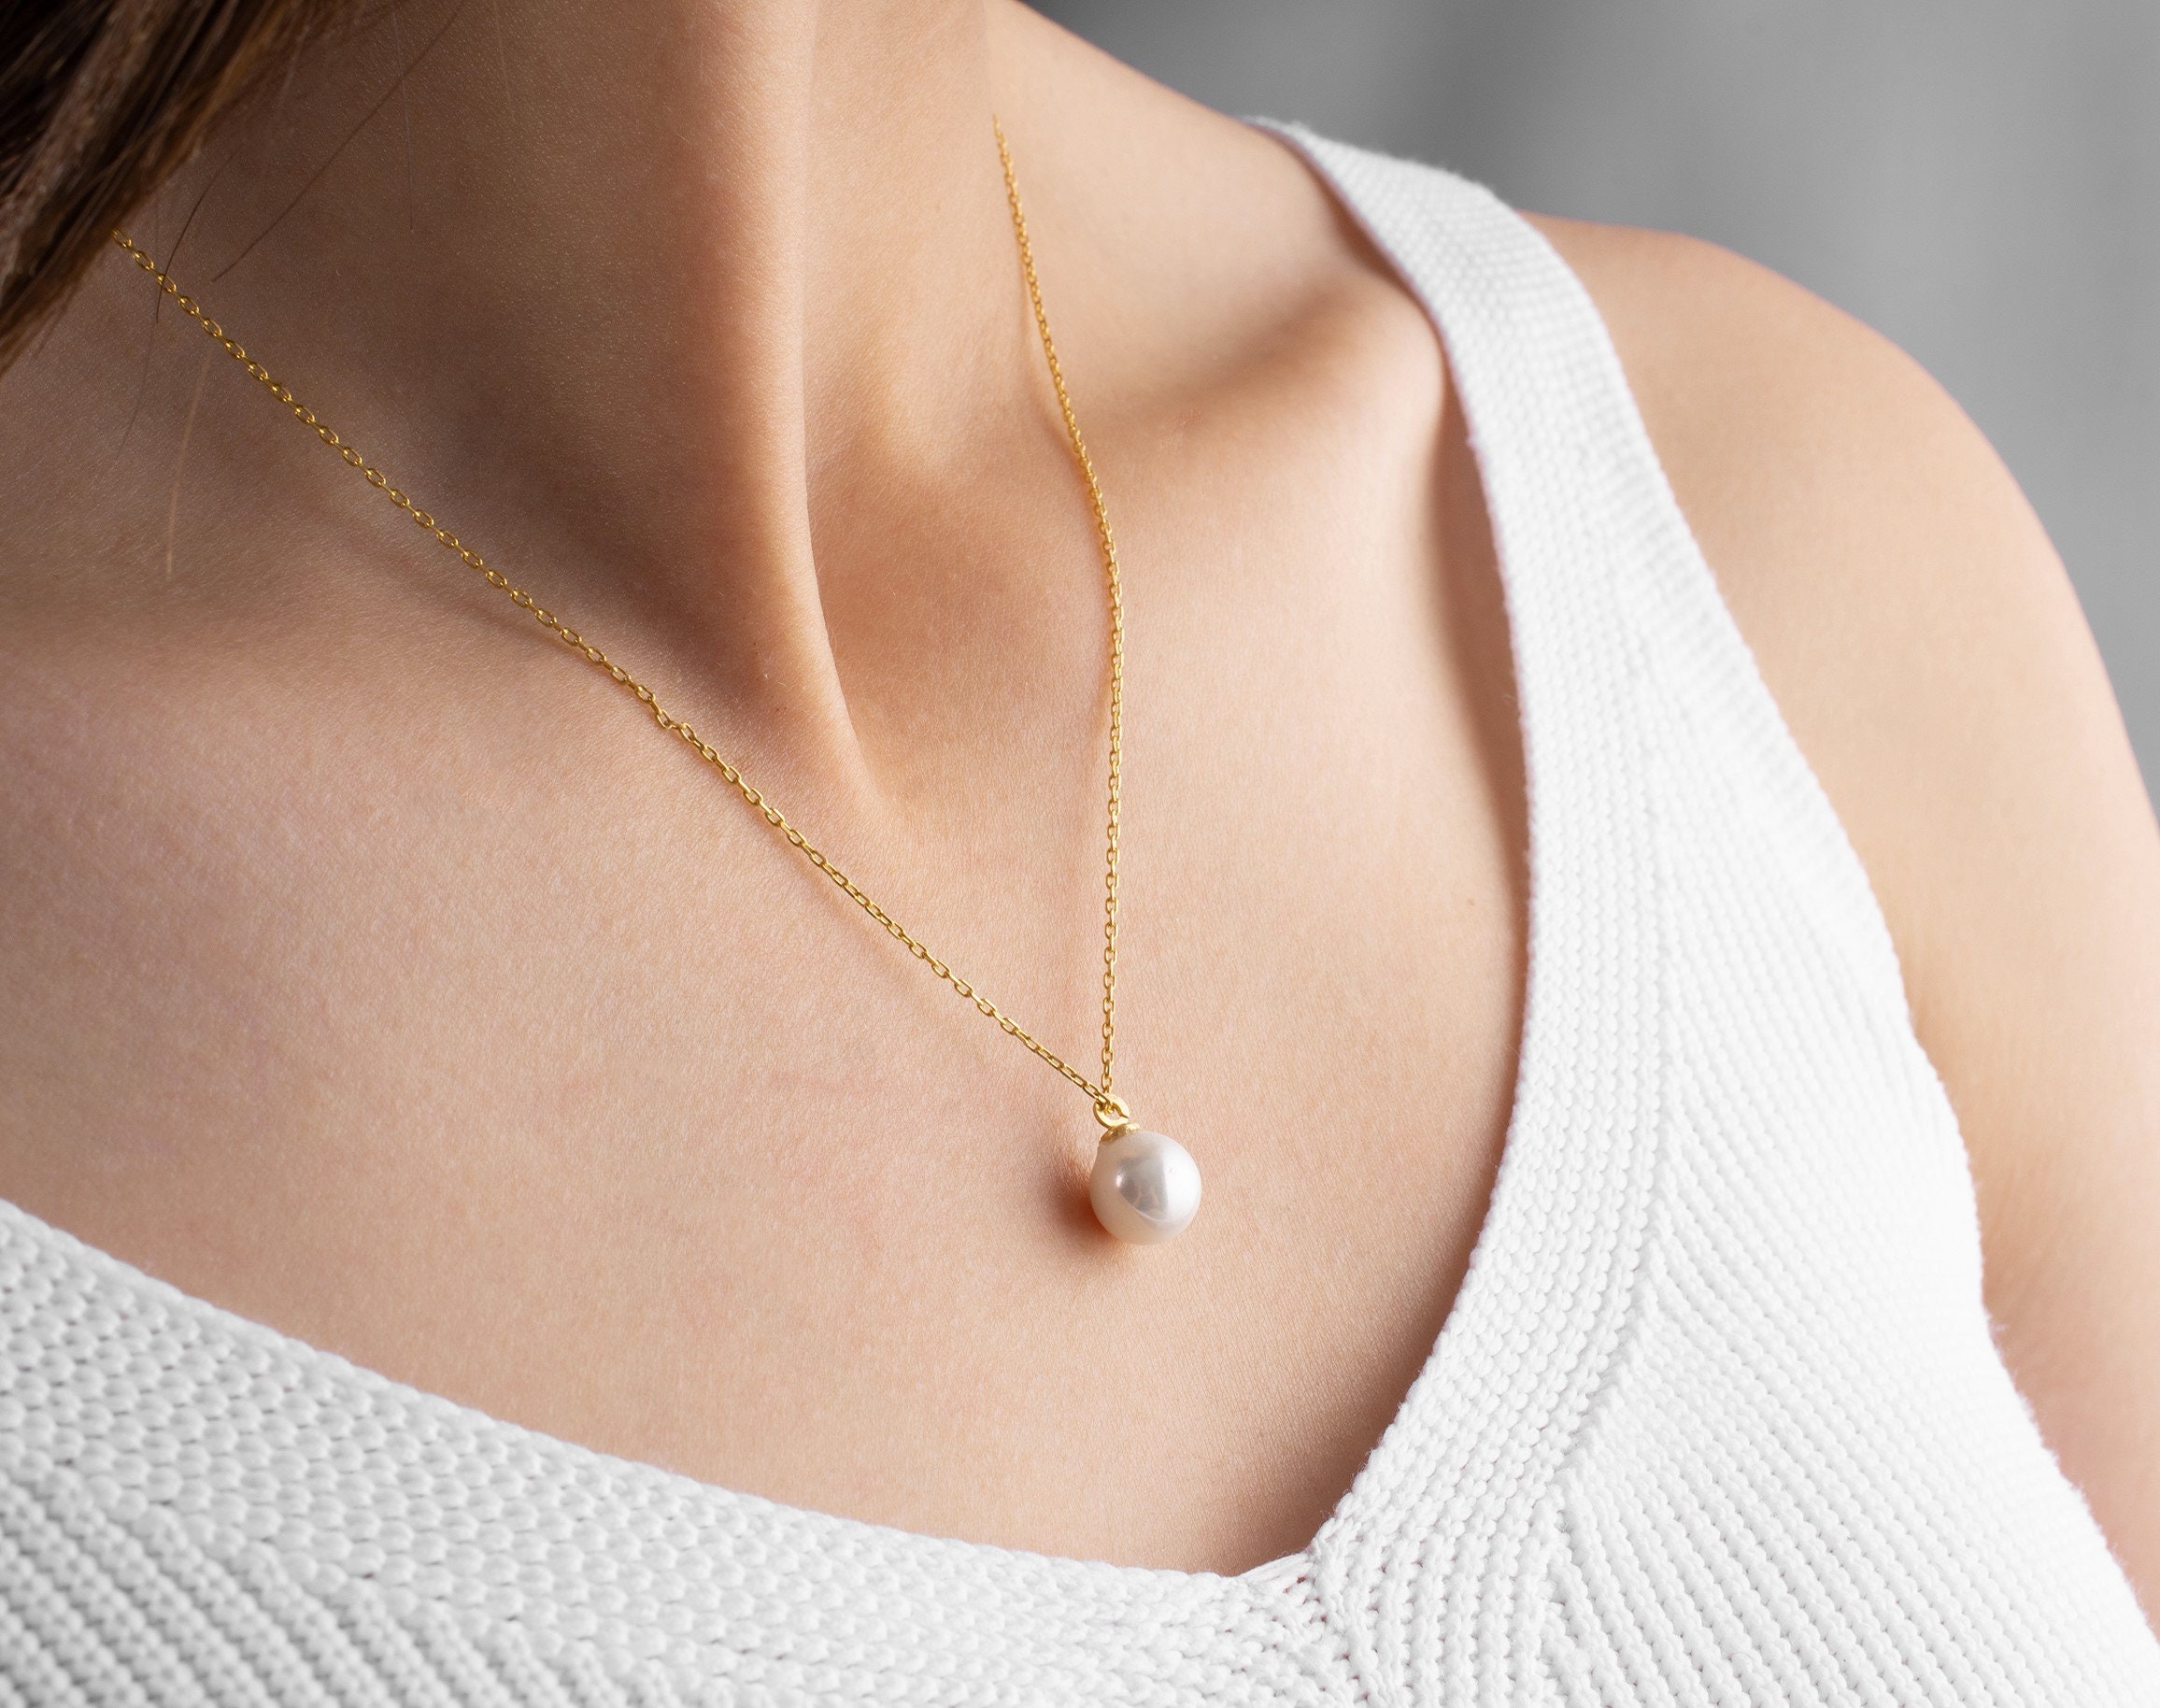 Small Gold Coin Necklace, Dainty Gold Disc Pendant Necklace, Minimalist Layering  Necklaces for Women Great for Everyday 